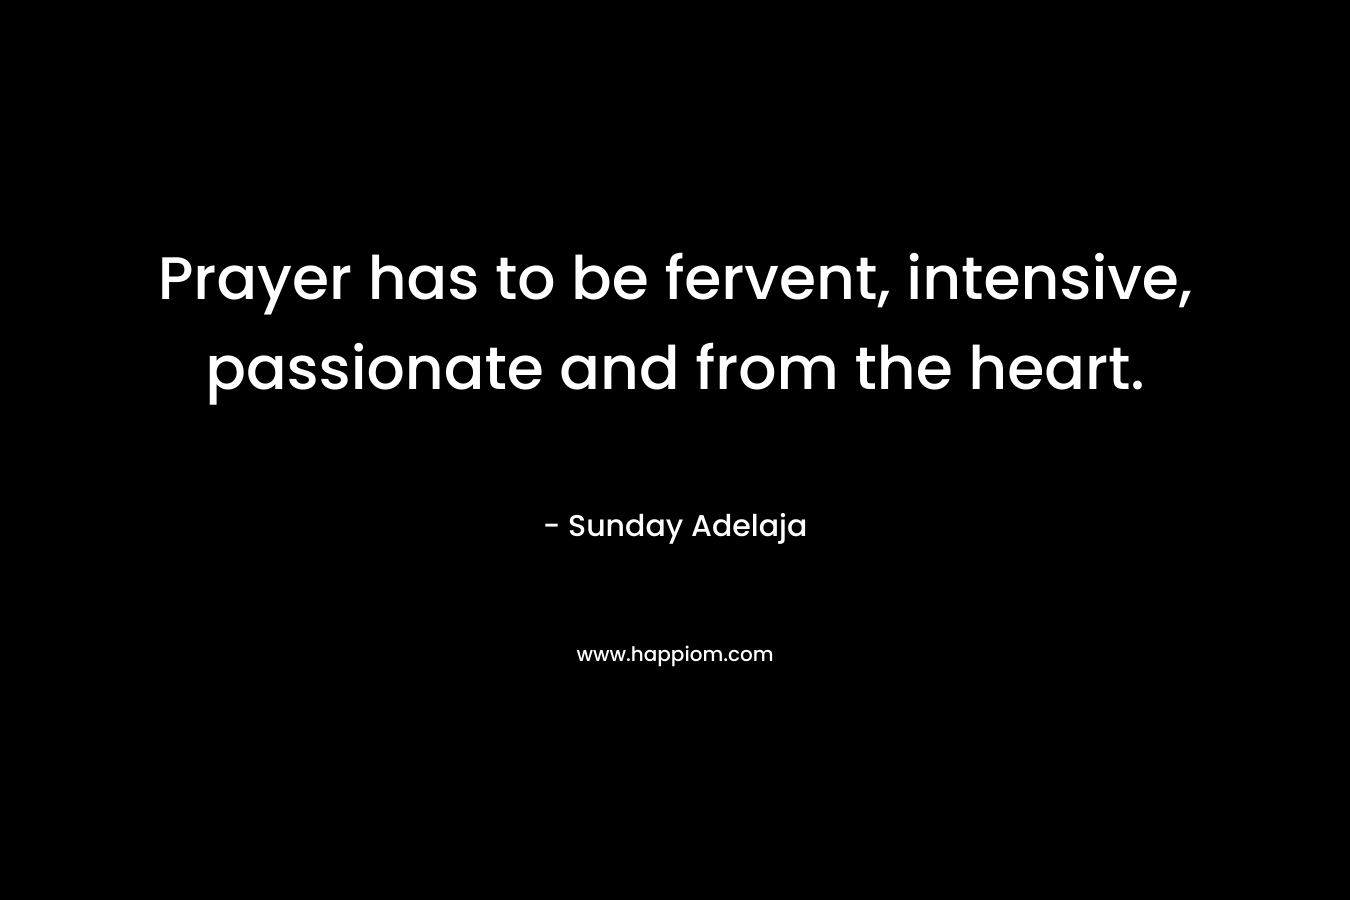 Prayer has to be fervent, intensive, passionate and from the heart.